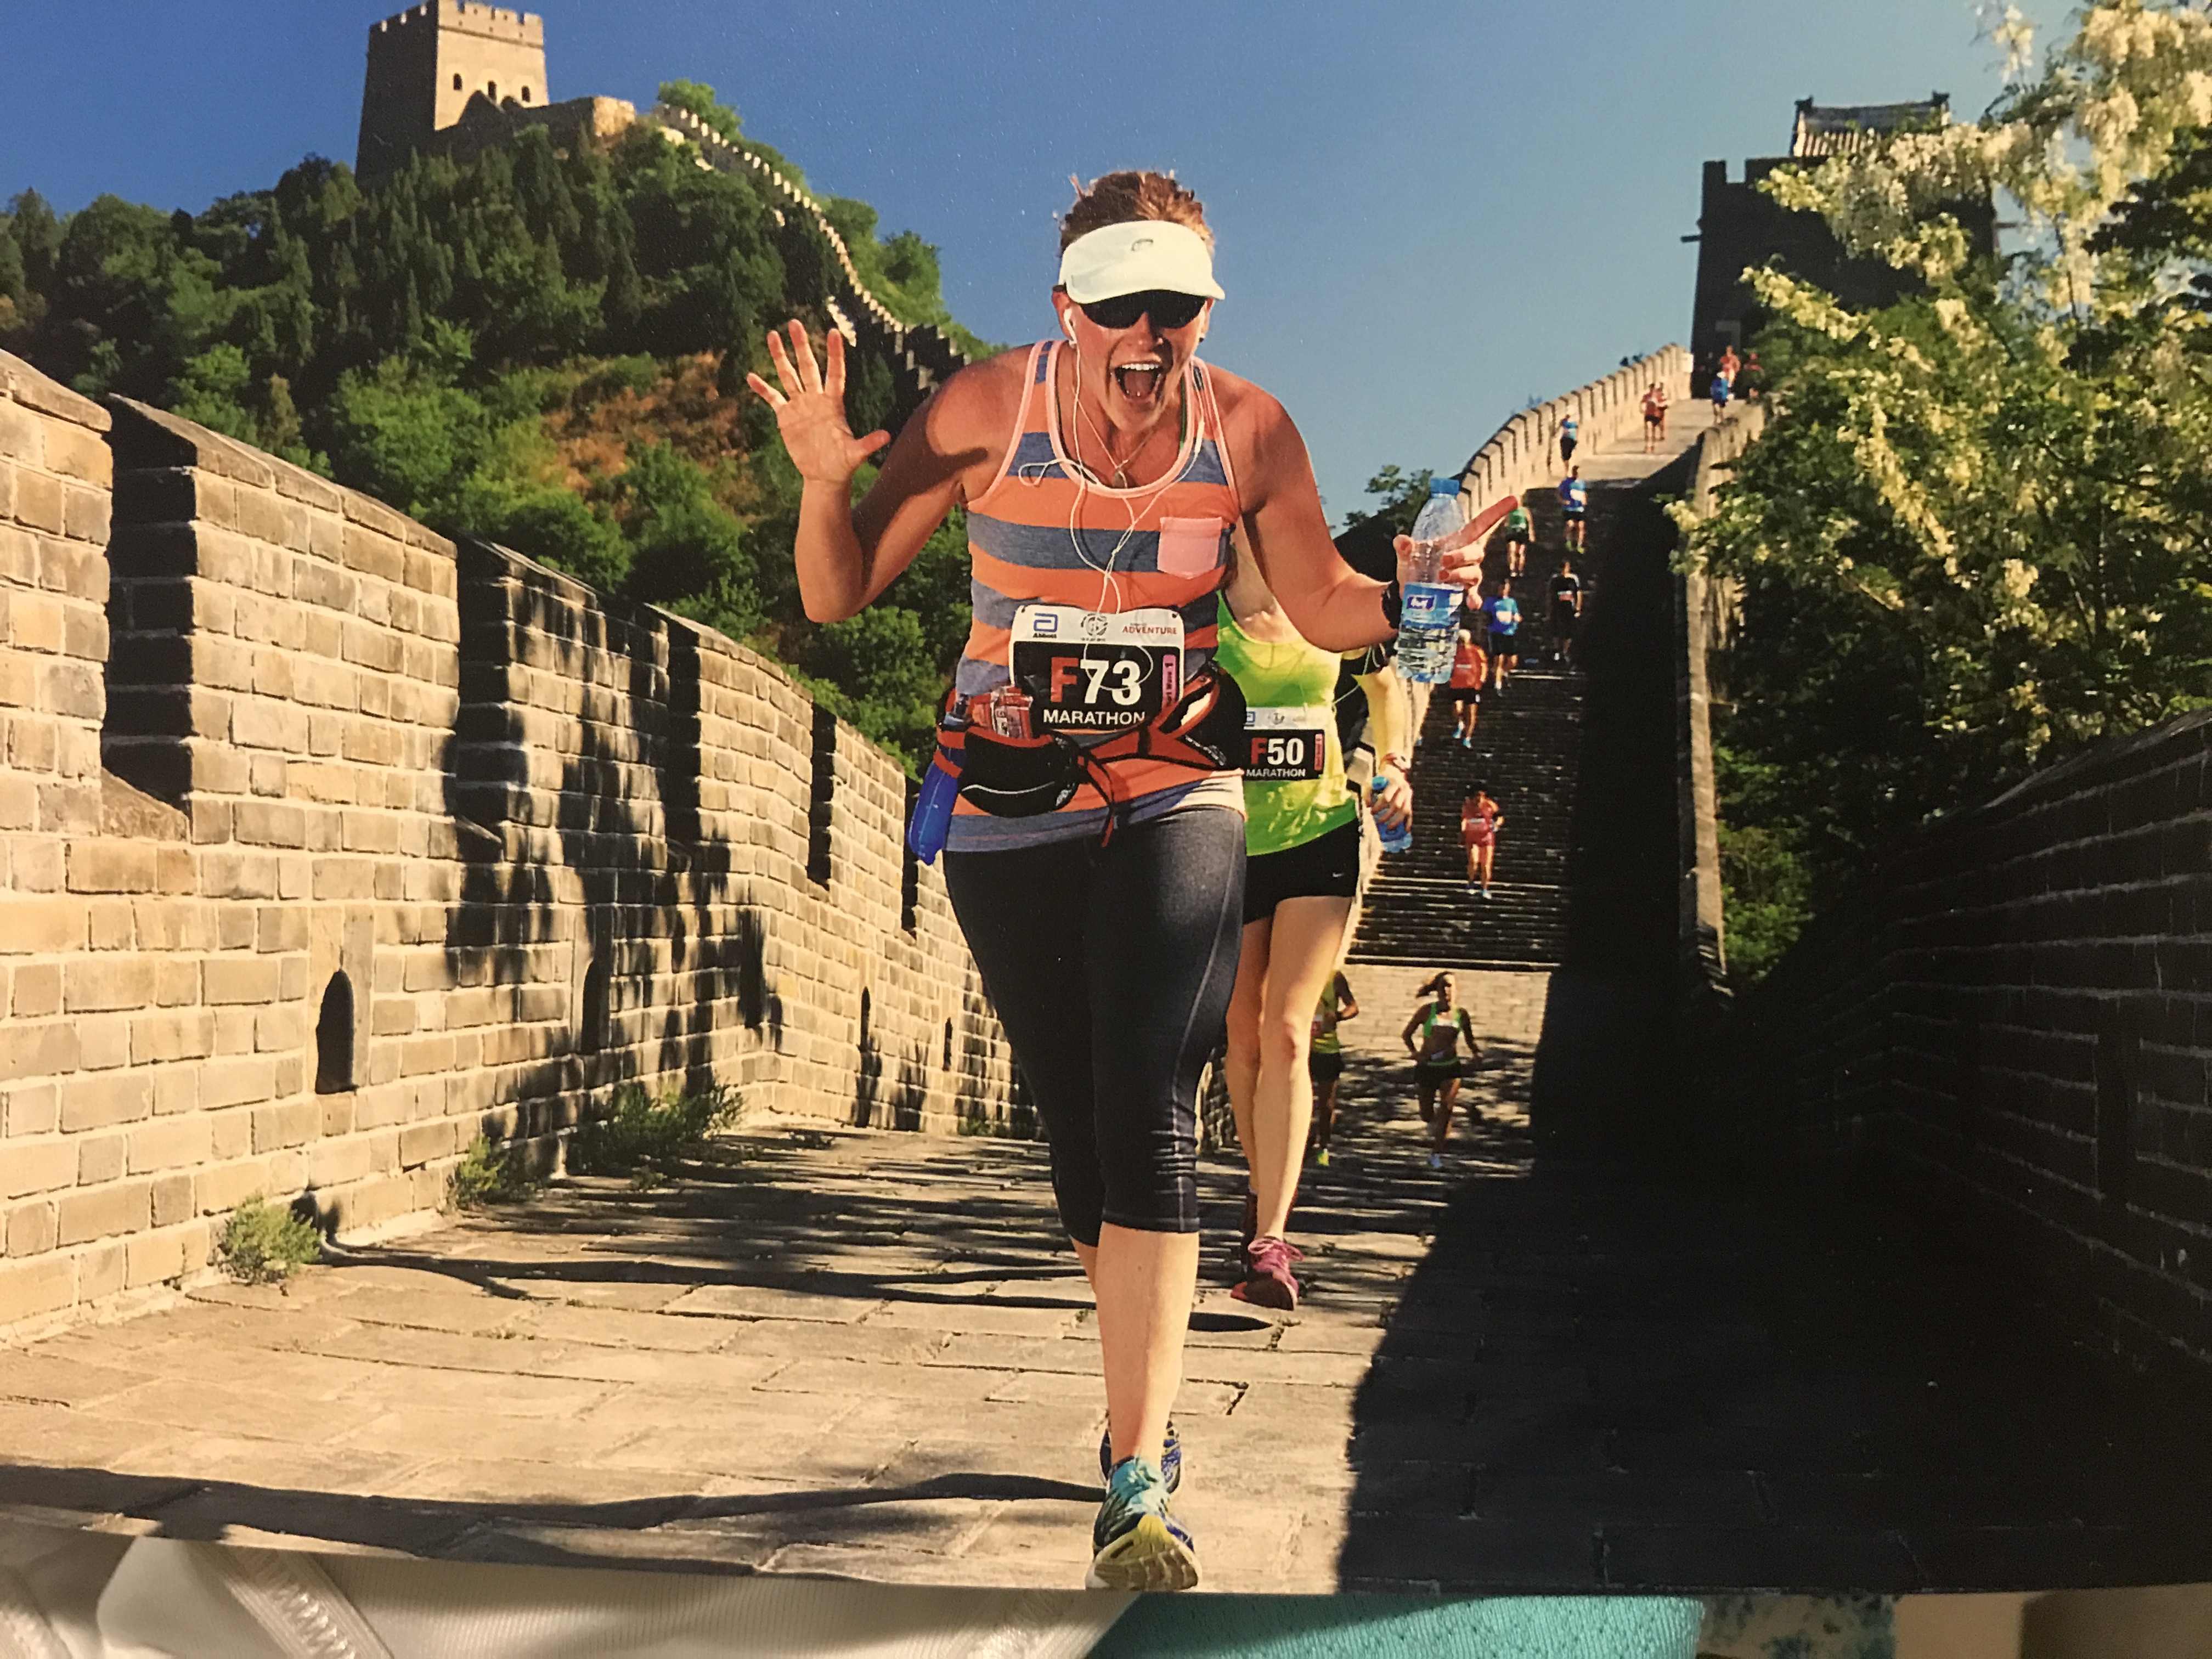 Michelle Vanden Bosch racing on the Great Wall of China.